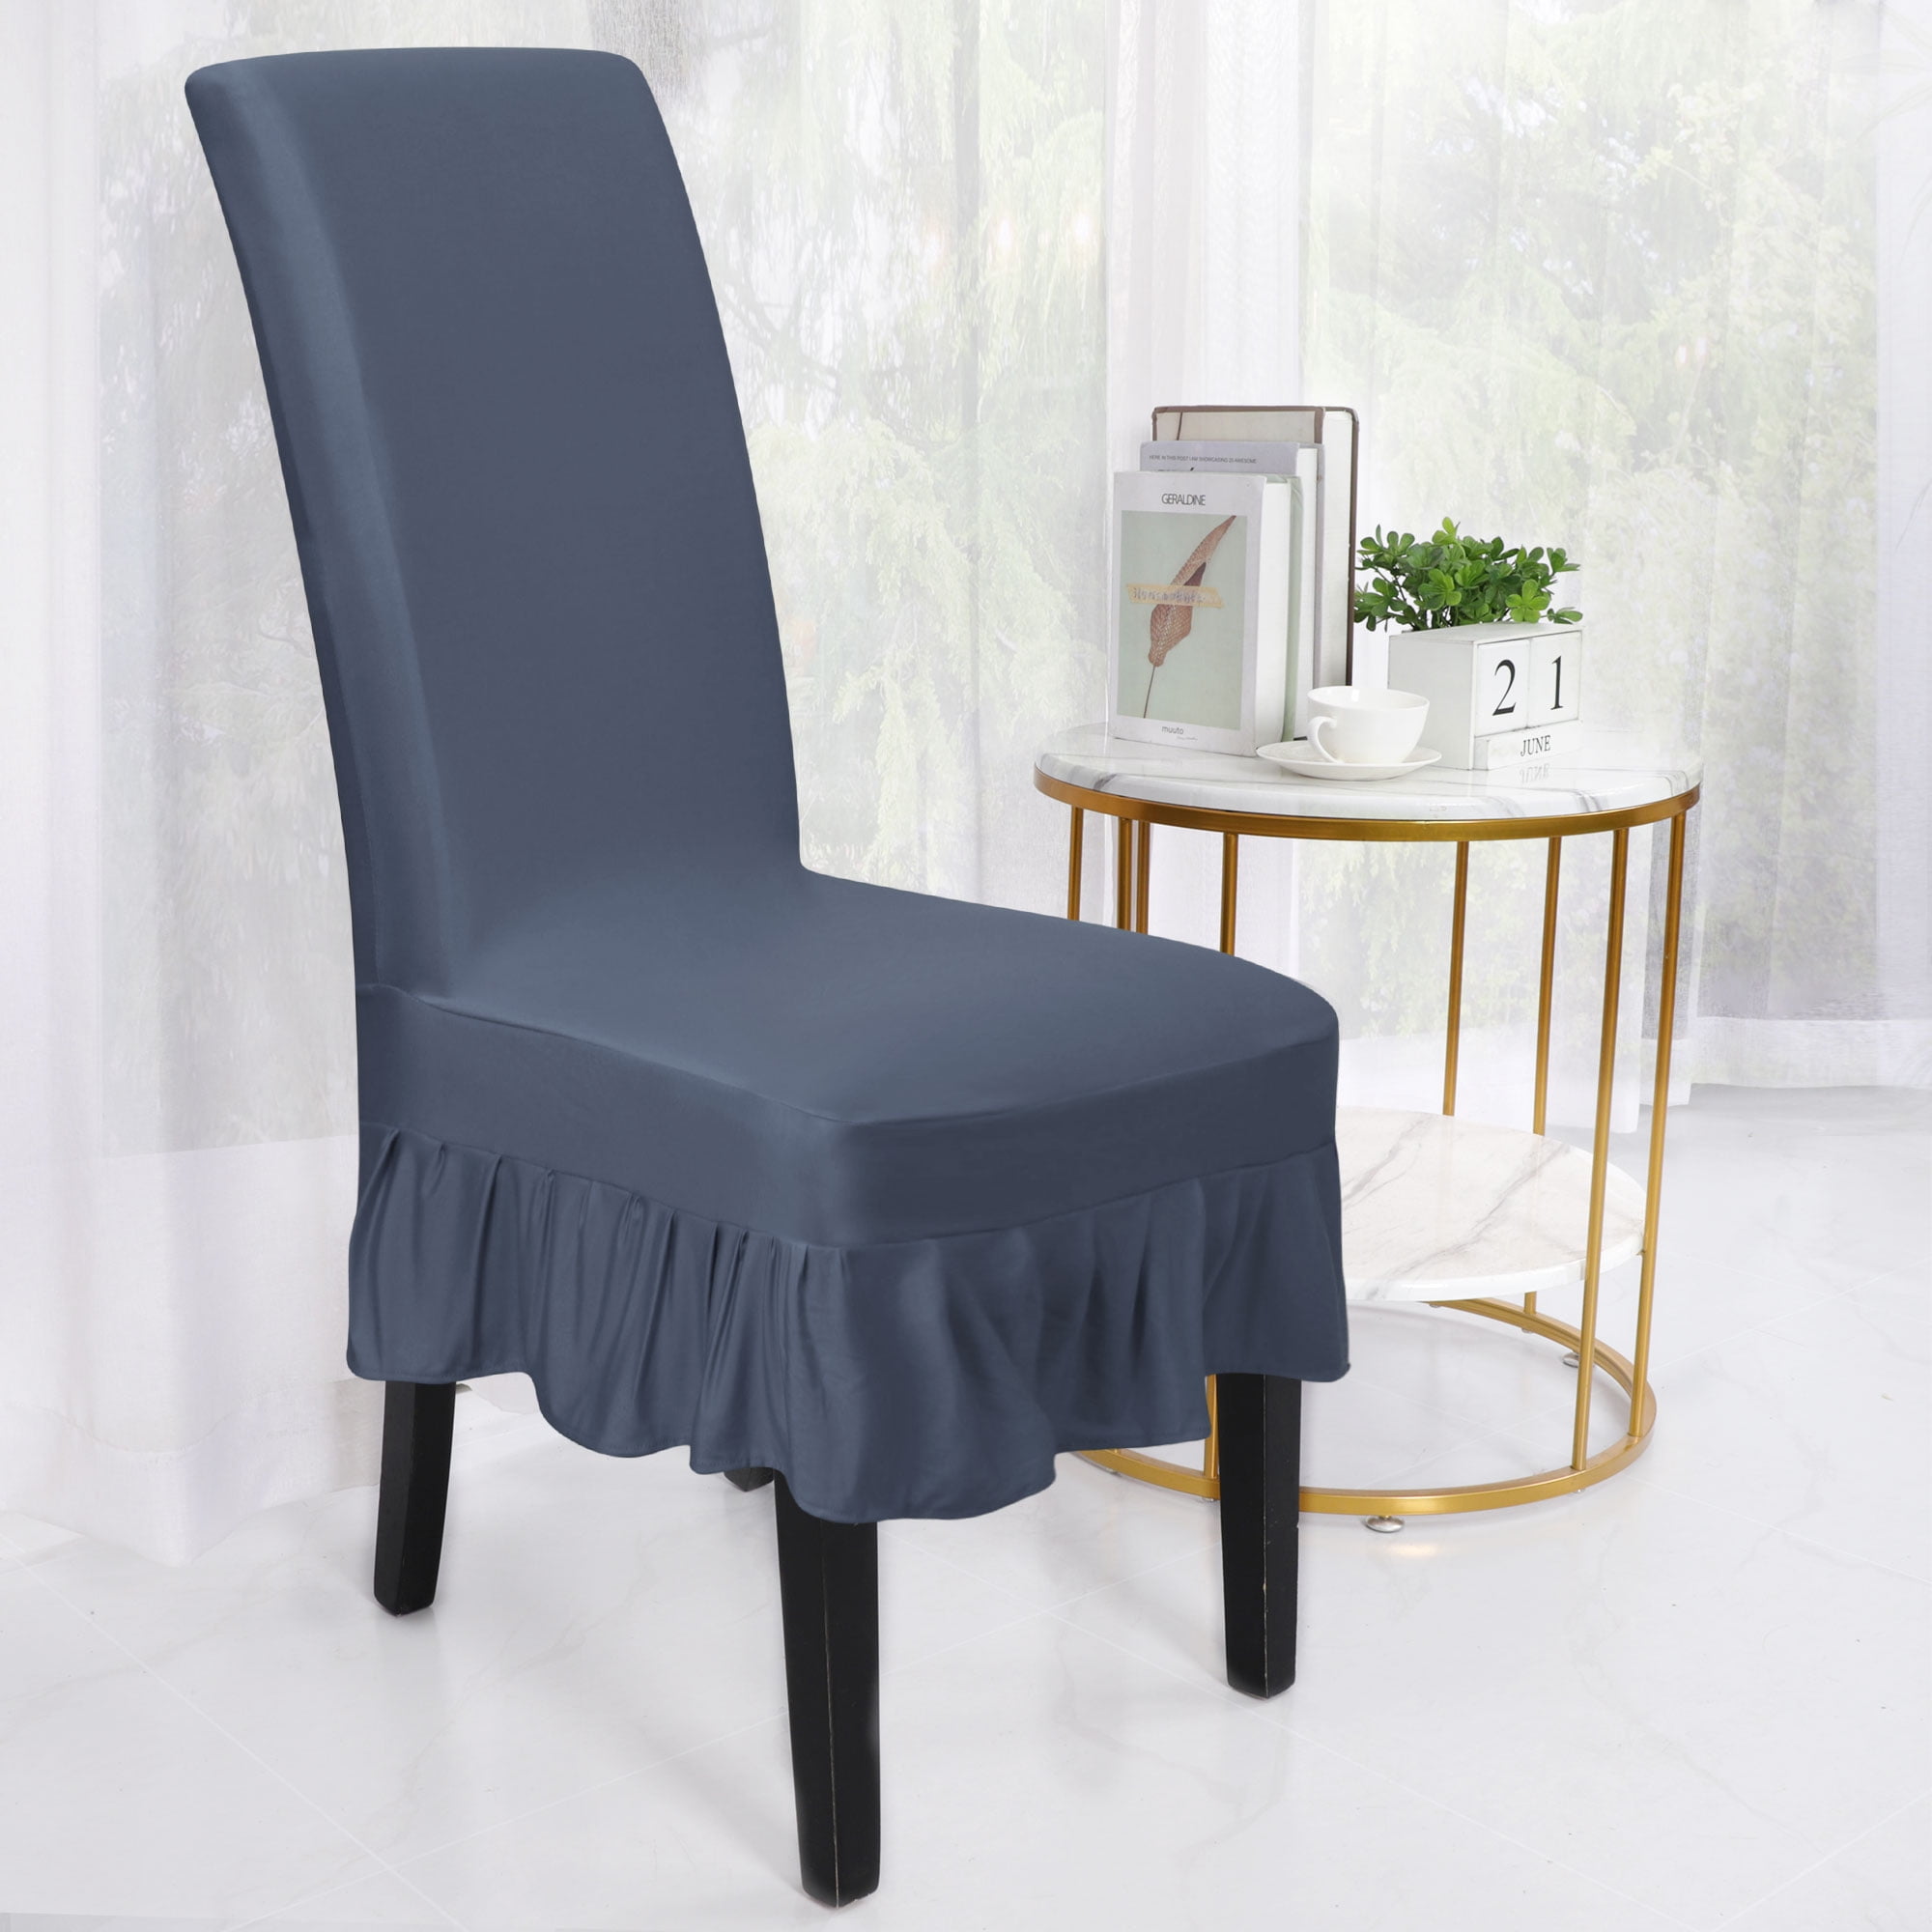 Details about   Chair Cover Stool Cover Dining Chair Cover Chair Cover Computer Chair Cover 